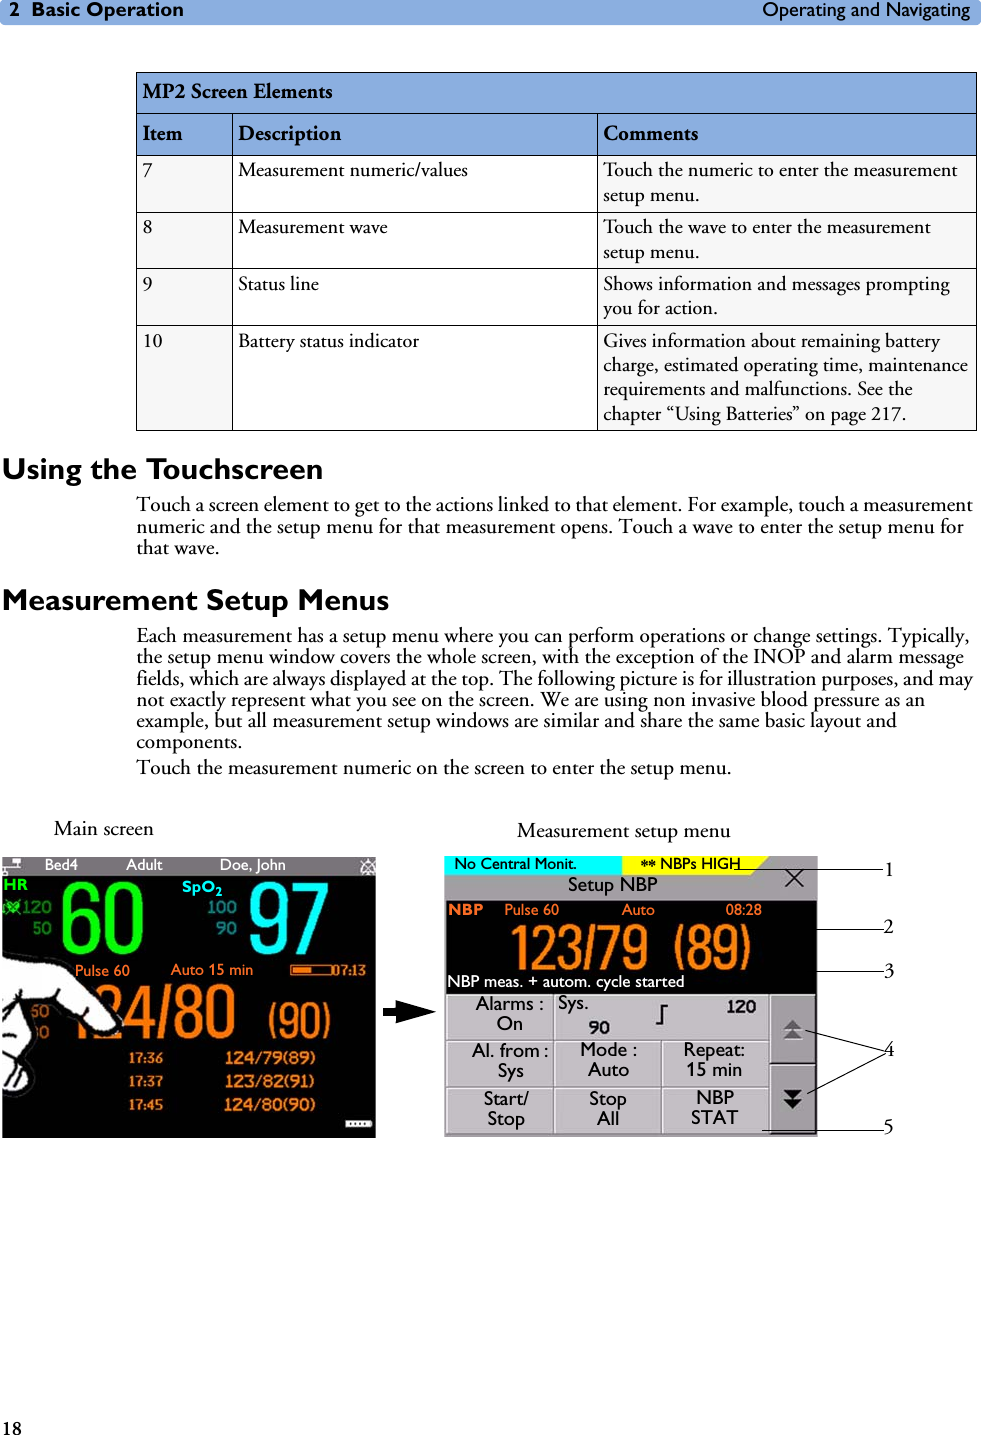 2 Basic Operation Operating and Navigating18Using the TouchscreenTouch a screen element to get to the actions linked to that element. For example, touch a measurement numeric and the setup menu for that measurement opens. Touch a wave to enter the setup menu for that wave.Measurement Setup MenusEach measurement has a setup menu where you can perform operations or change settings. Typically, the setup menu window covers the whole screen, with the exception of the INOP and alarm message fields, which are always displayed at the top. The following picture is for illustration purposes, and may not exactly represent what you see on the screen. We are using non invasive blood pressure as an example, but all measurement setup windows are similar and share the same basic layout and components.Touch the measurement numeric on the screen to enter the setup menu.7 Measurement numeric/values Touch the numeric to enter the measurement setup menu.8Measurement wave Touch the wave to enter the measurement setup menu.9 Status line Shows information and messages prompting you for action.10 Battery status indicator Gives information about remaining battery charge, estimated operating time, maintenance requirements and malfunctions. See the chapter “Using Batteries” on page 217.MP2 Screen ElementsItem Description CommentsHR SpO2Pulse 60 Auto 15 minBed4 Doe, JohnAdult No Central Monit. NBPs HIGH**Alarms : OnSys.Al. from : SysMode : AutoRepeat: 15 minStart/StopStop AllNBP STATNBP meas. + autom. cycle startedNBP 23451Main screen Measurement setup menuPulse 60 Auto 08:28Setup NBP